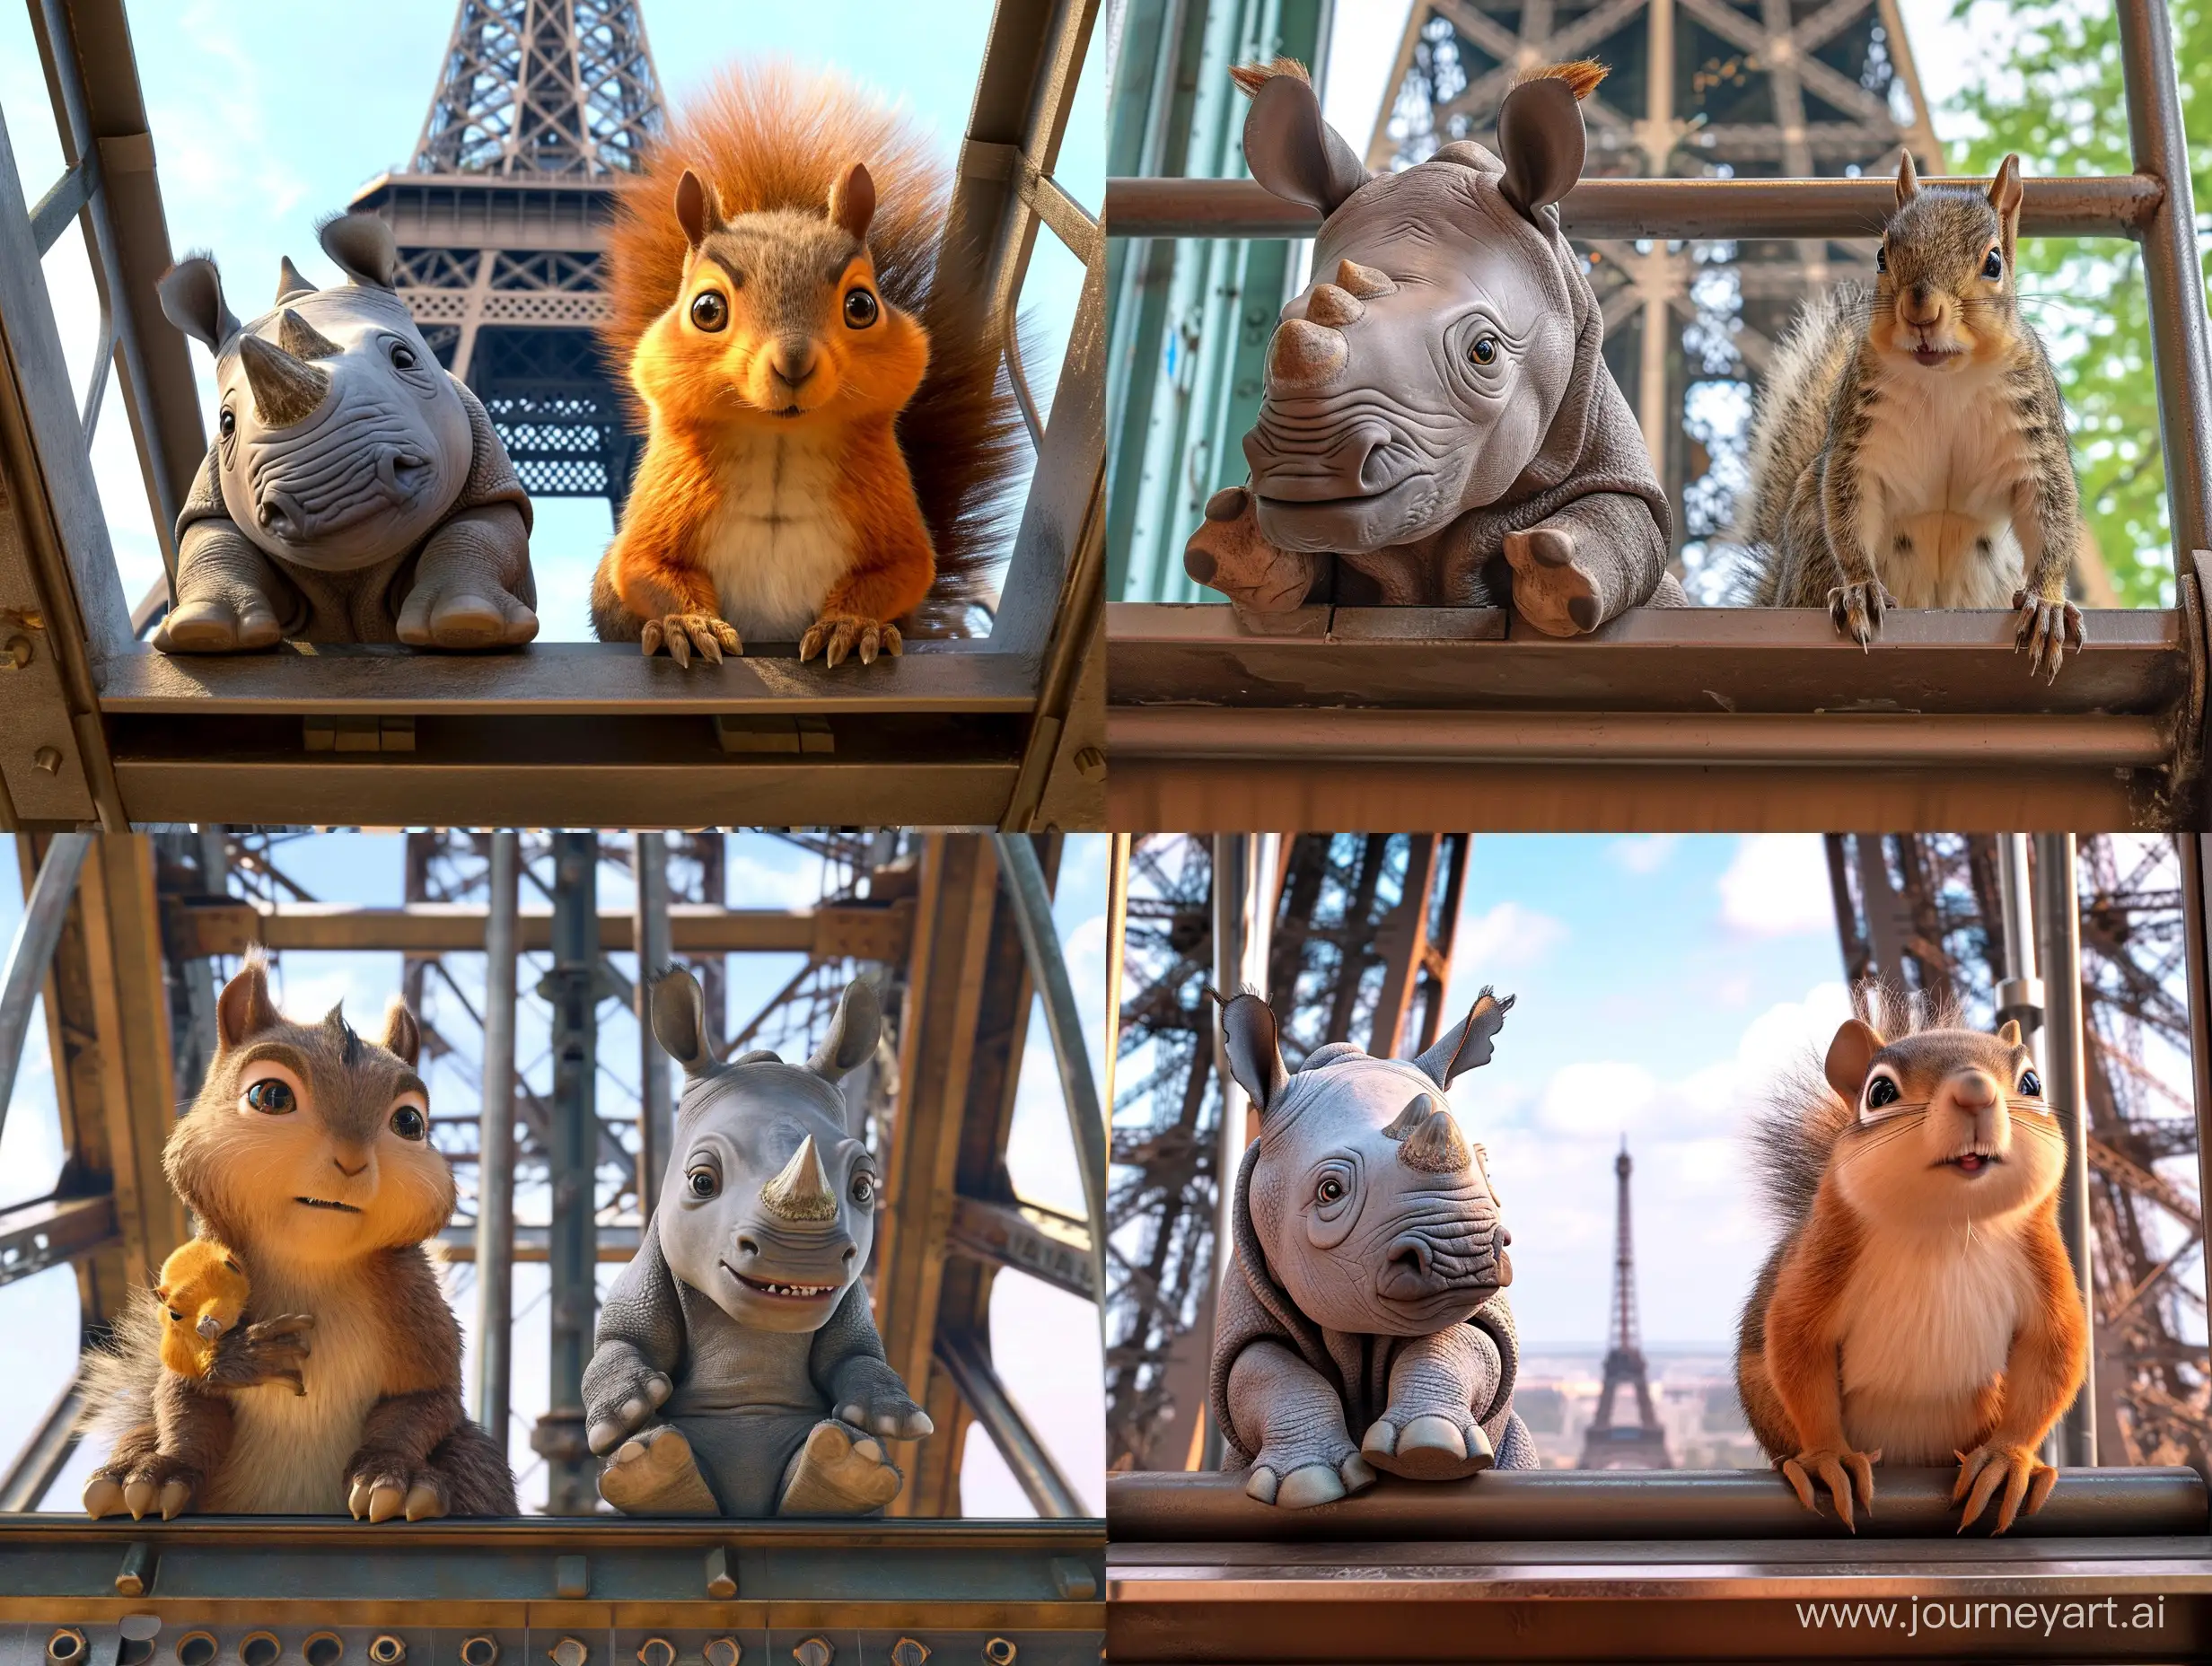 A picture of Remy, the baby rhino, and Sam, the squirrel, shoe were best friends, riding the elevator to the top of the Eiffel Tower.